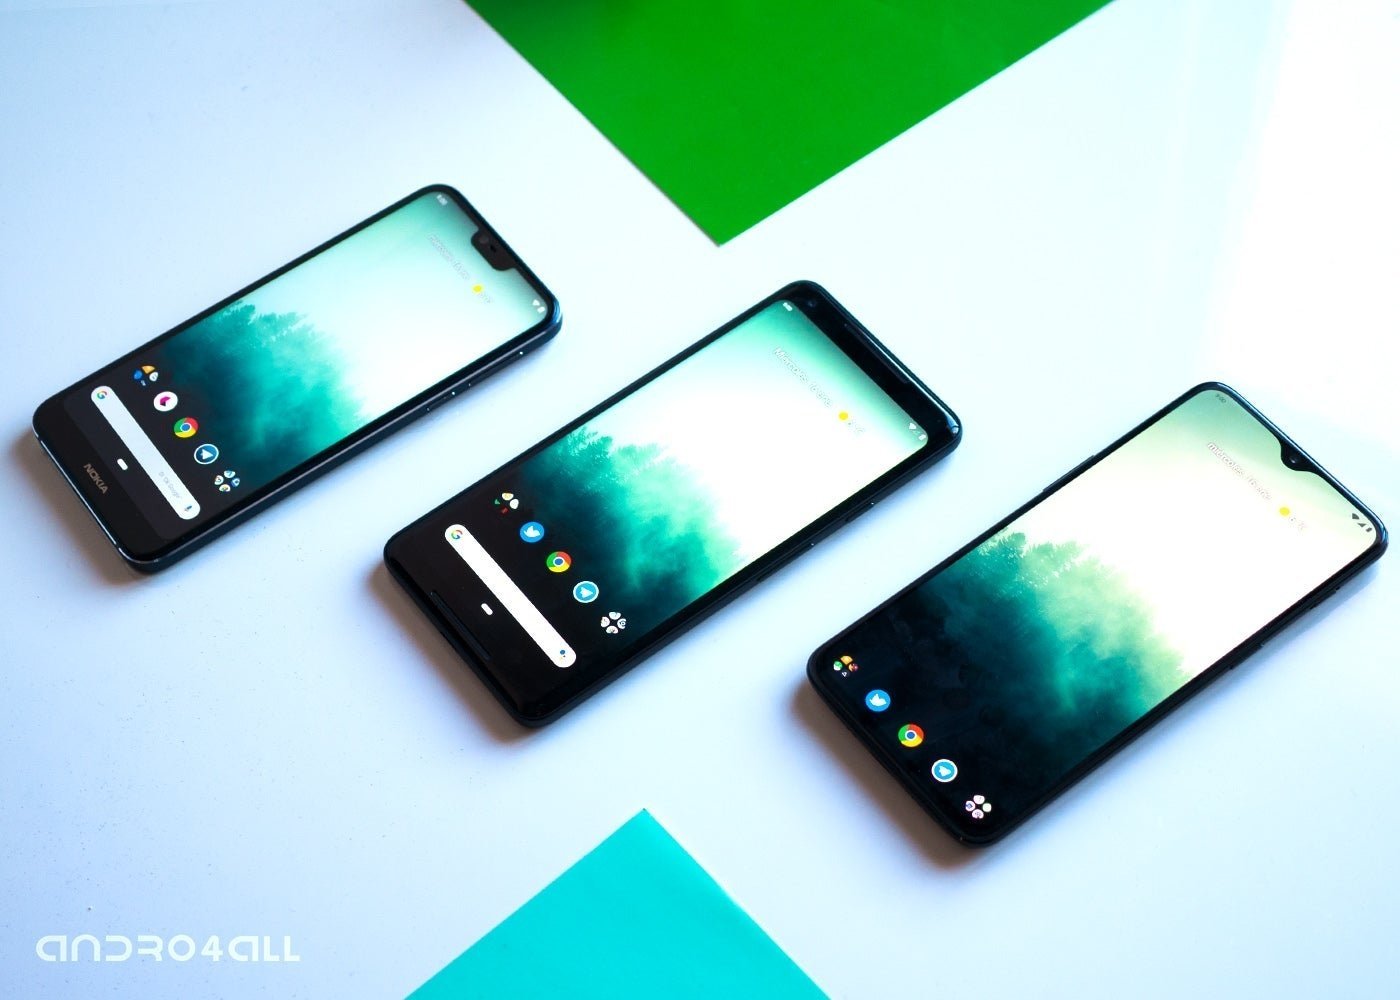 Moviles con Android One, Pixel ROM y OxygenOS